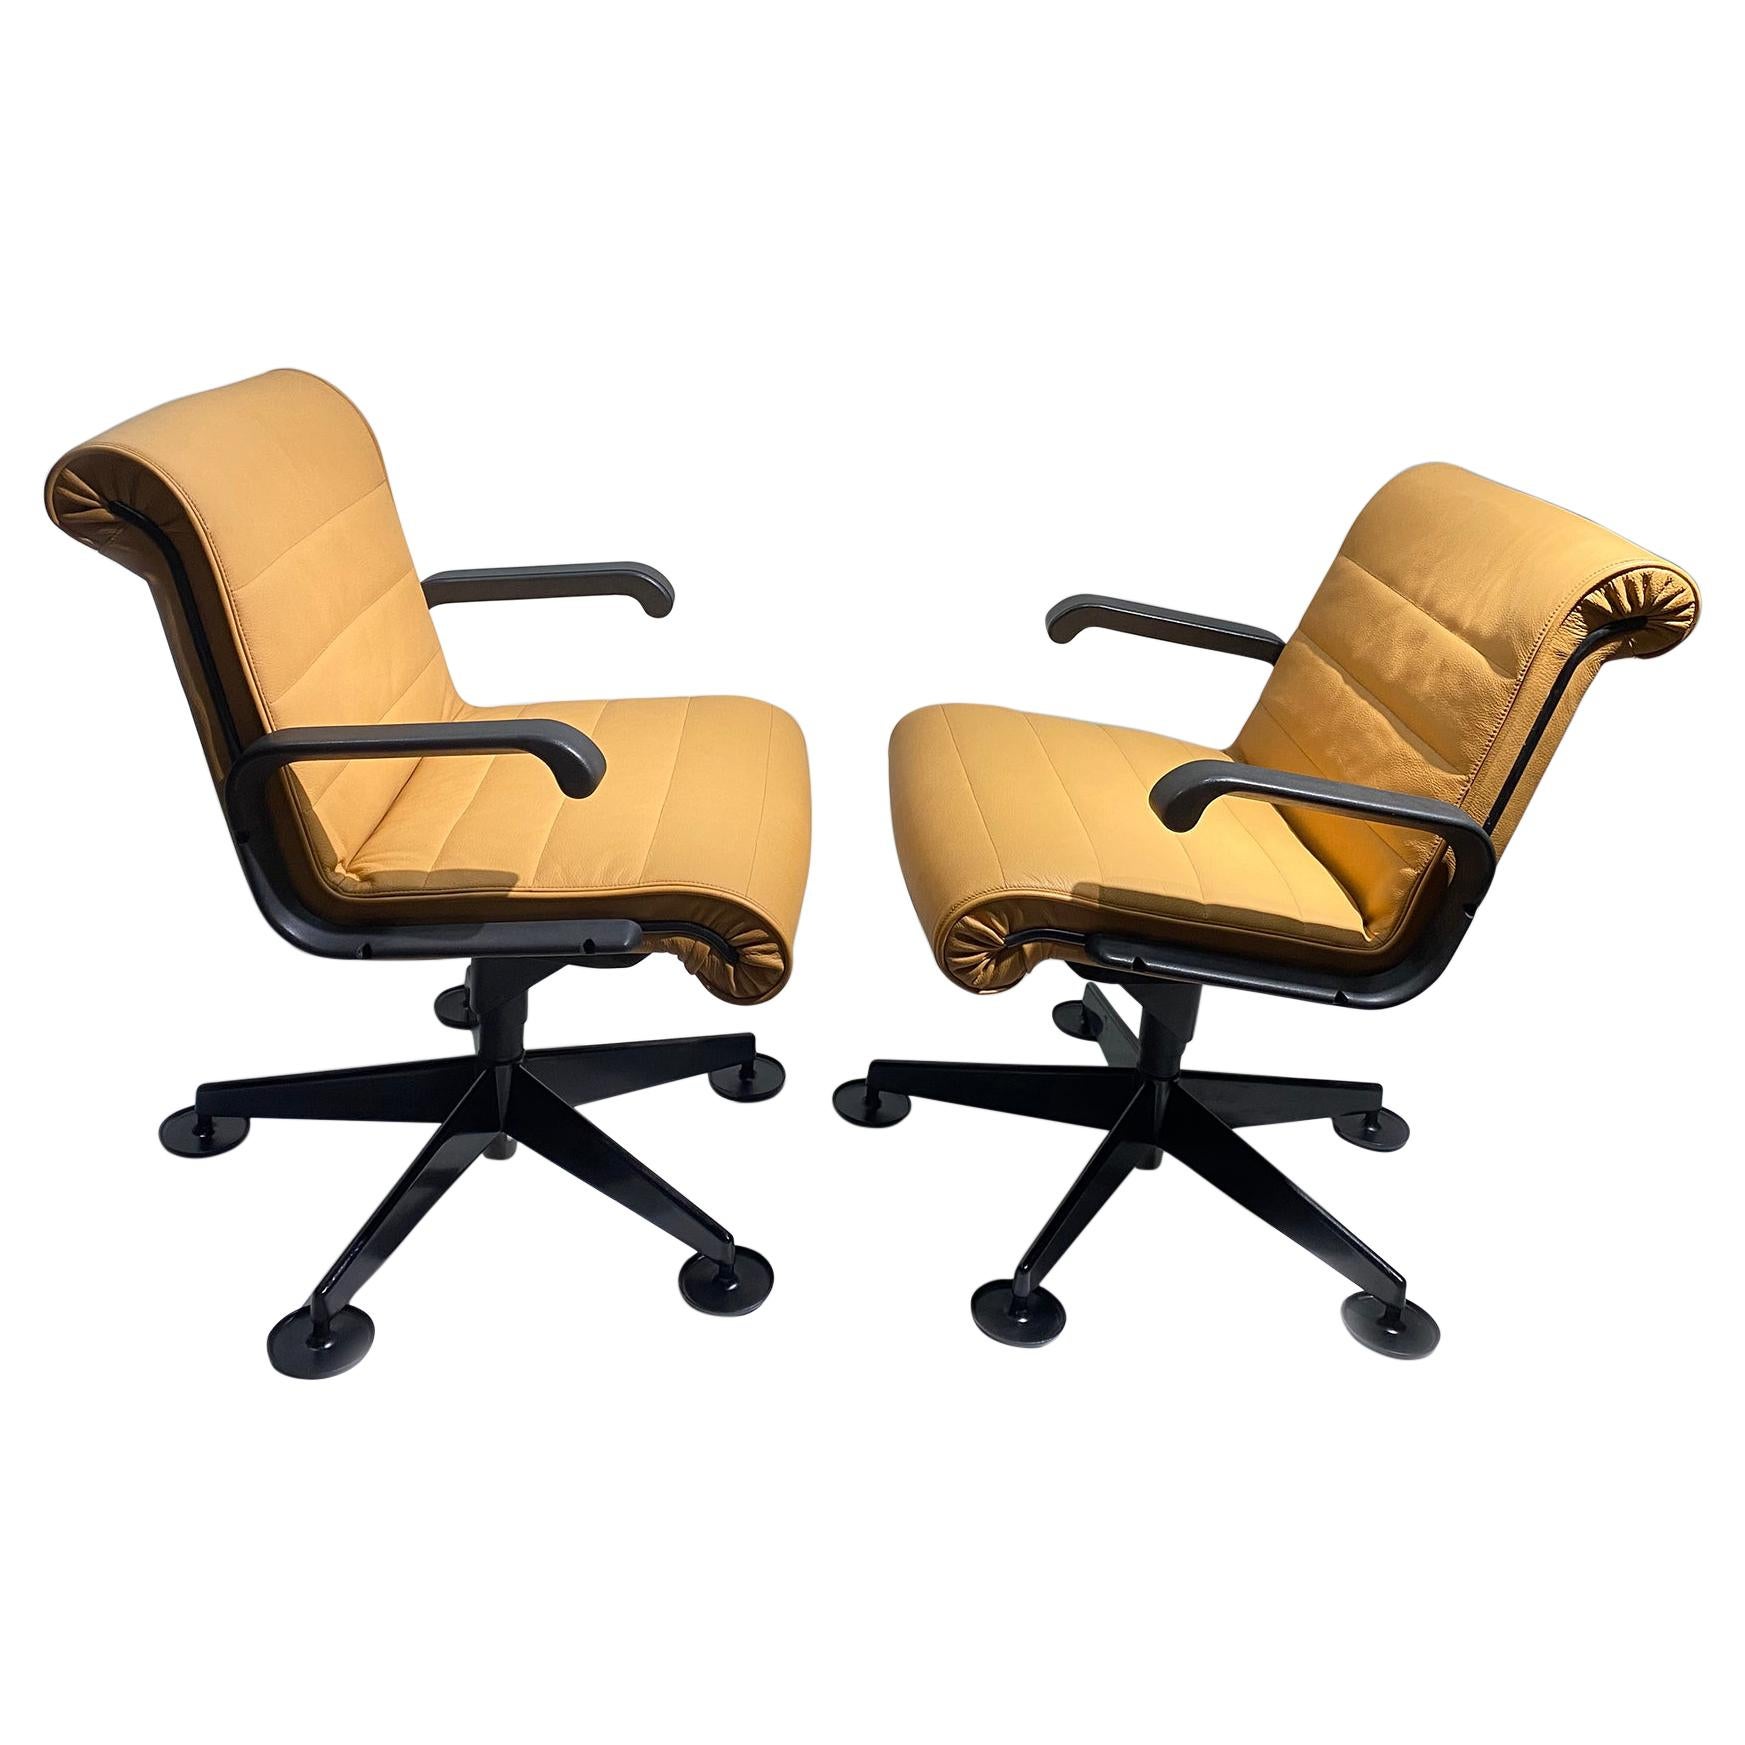 Pair of Richard Sapper for Knoll Executive Desk Chairs